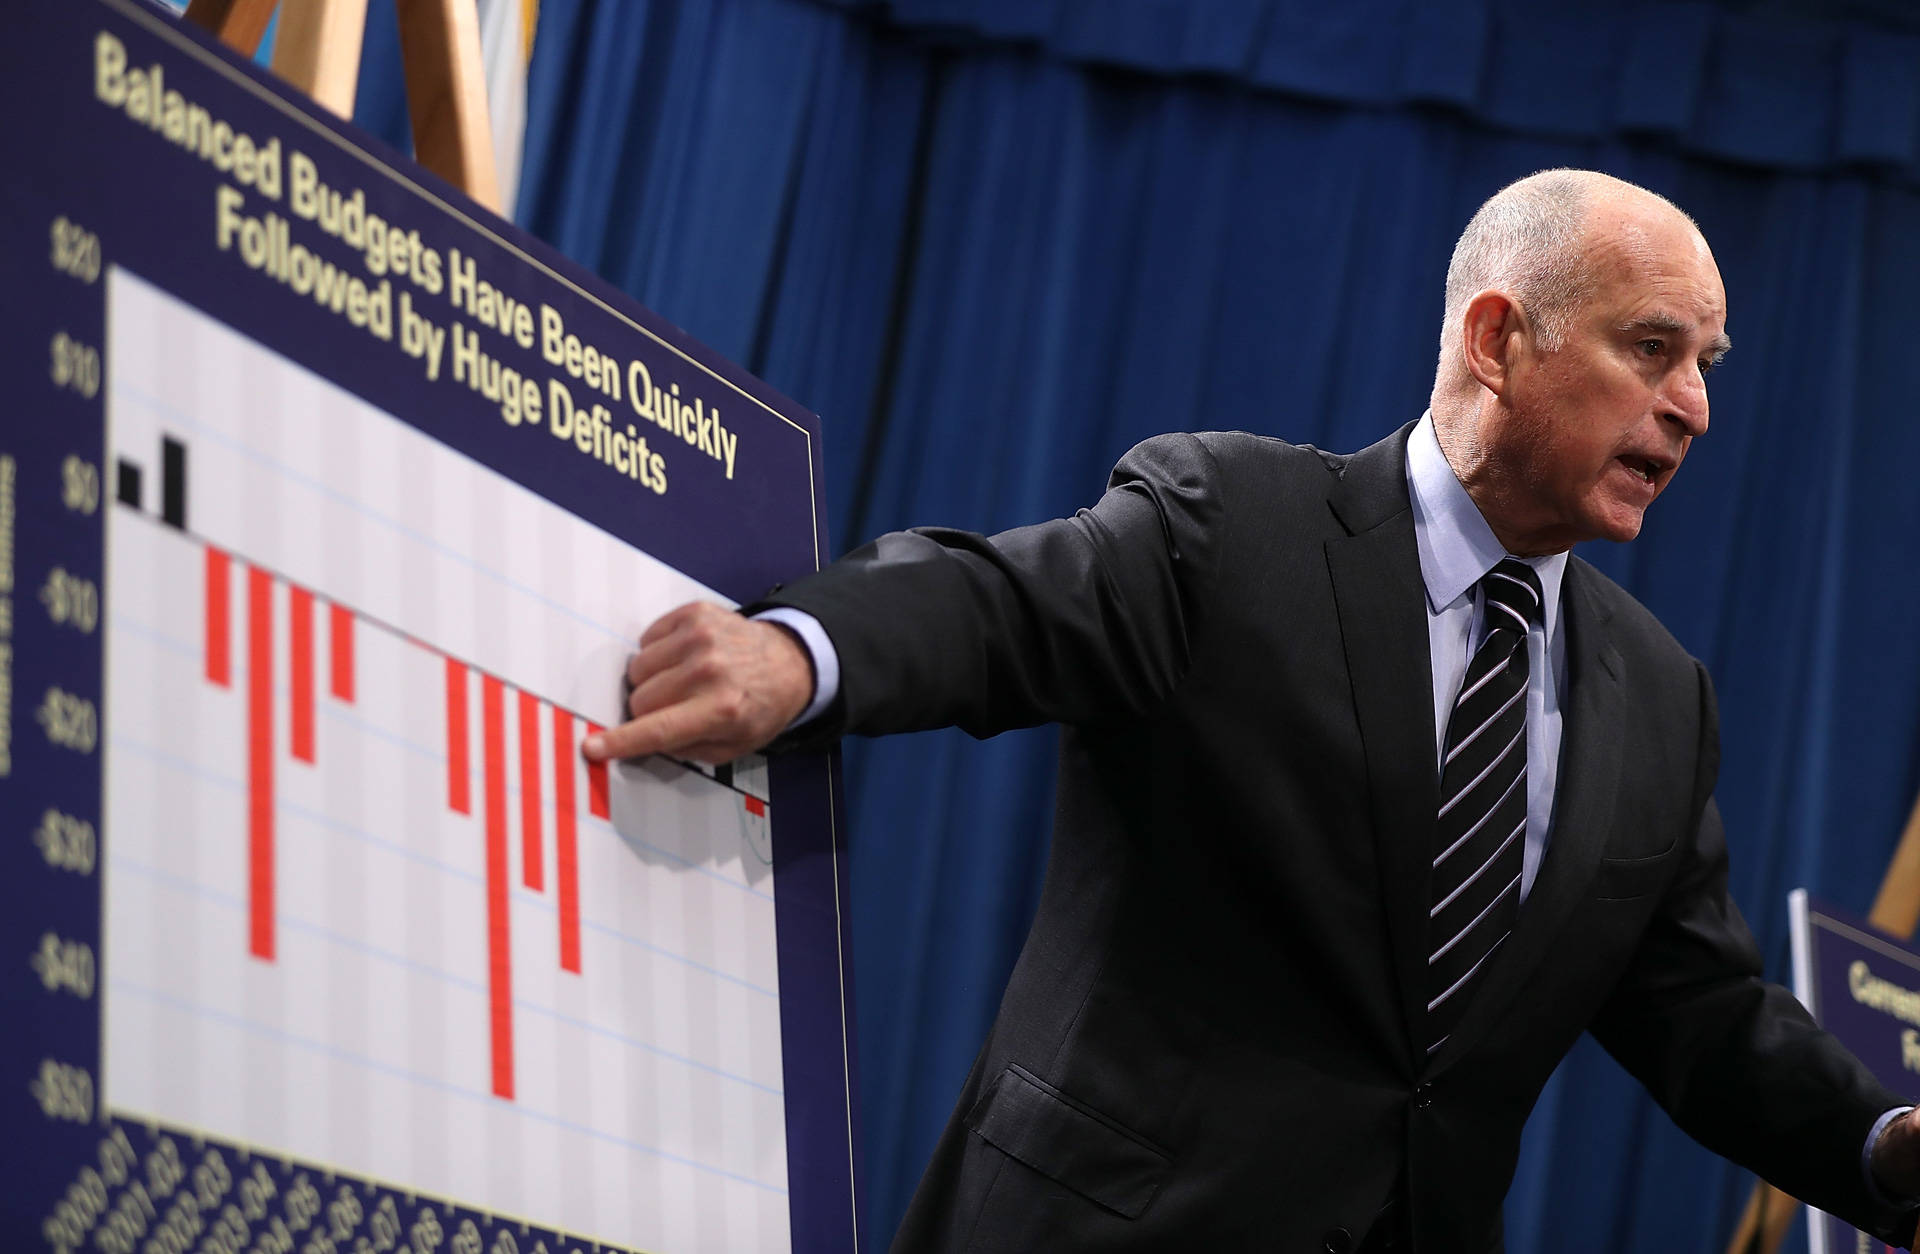 Gov. Jerry Brown speaks at a news conference where he revealed his revised budget on May 11, 2017, in Sacramento. Justin Sullivan/Getty Images